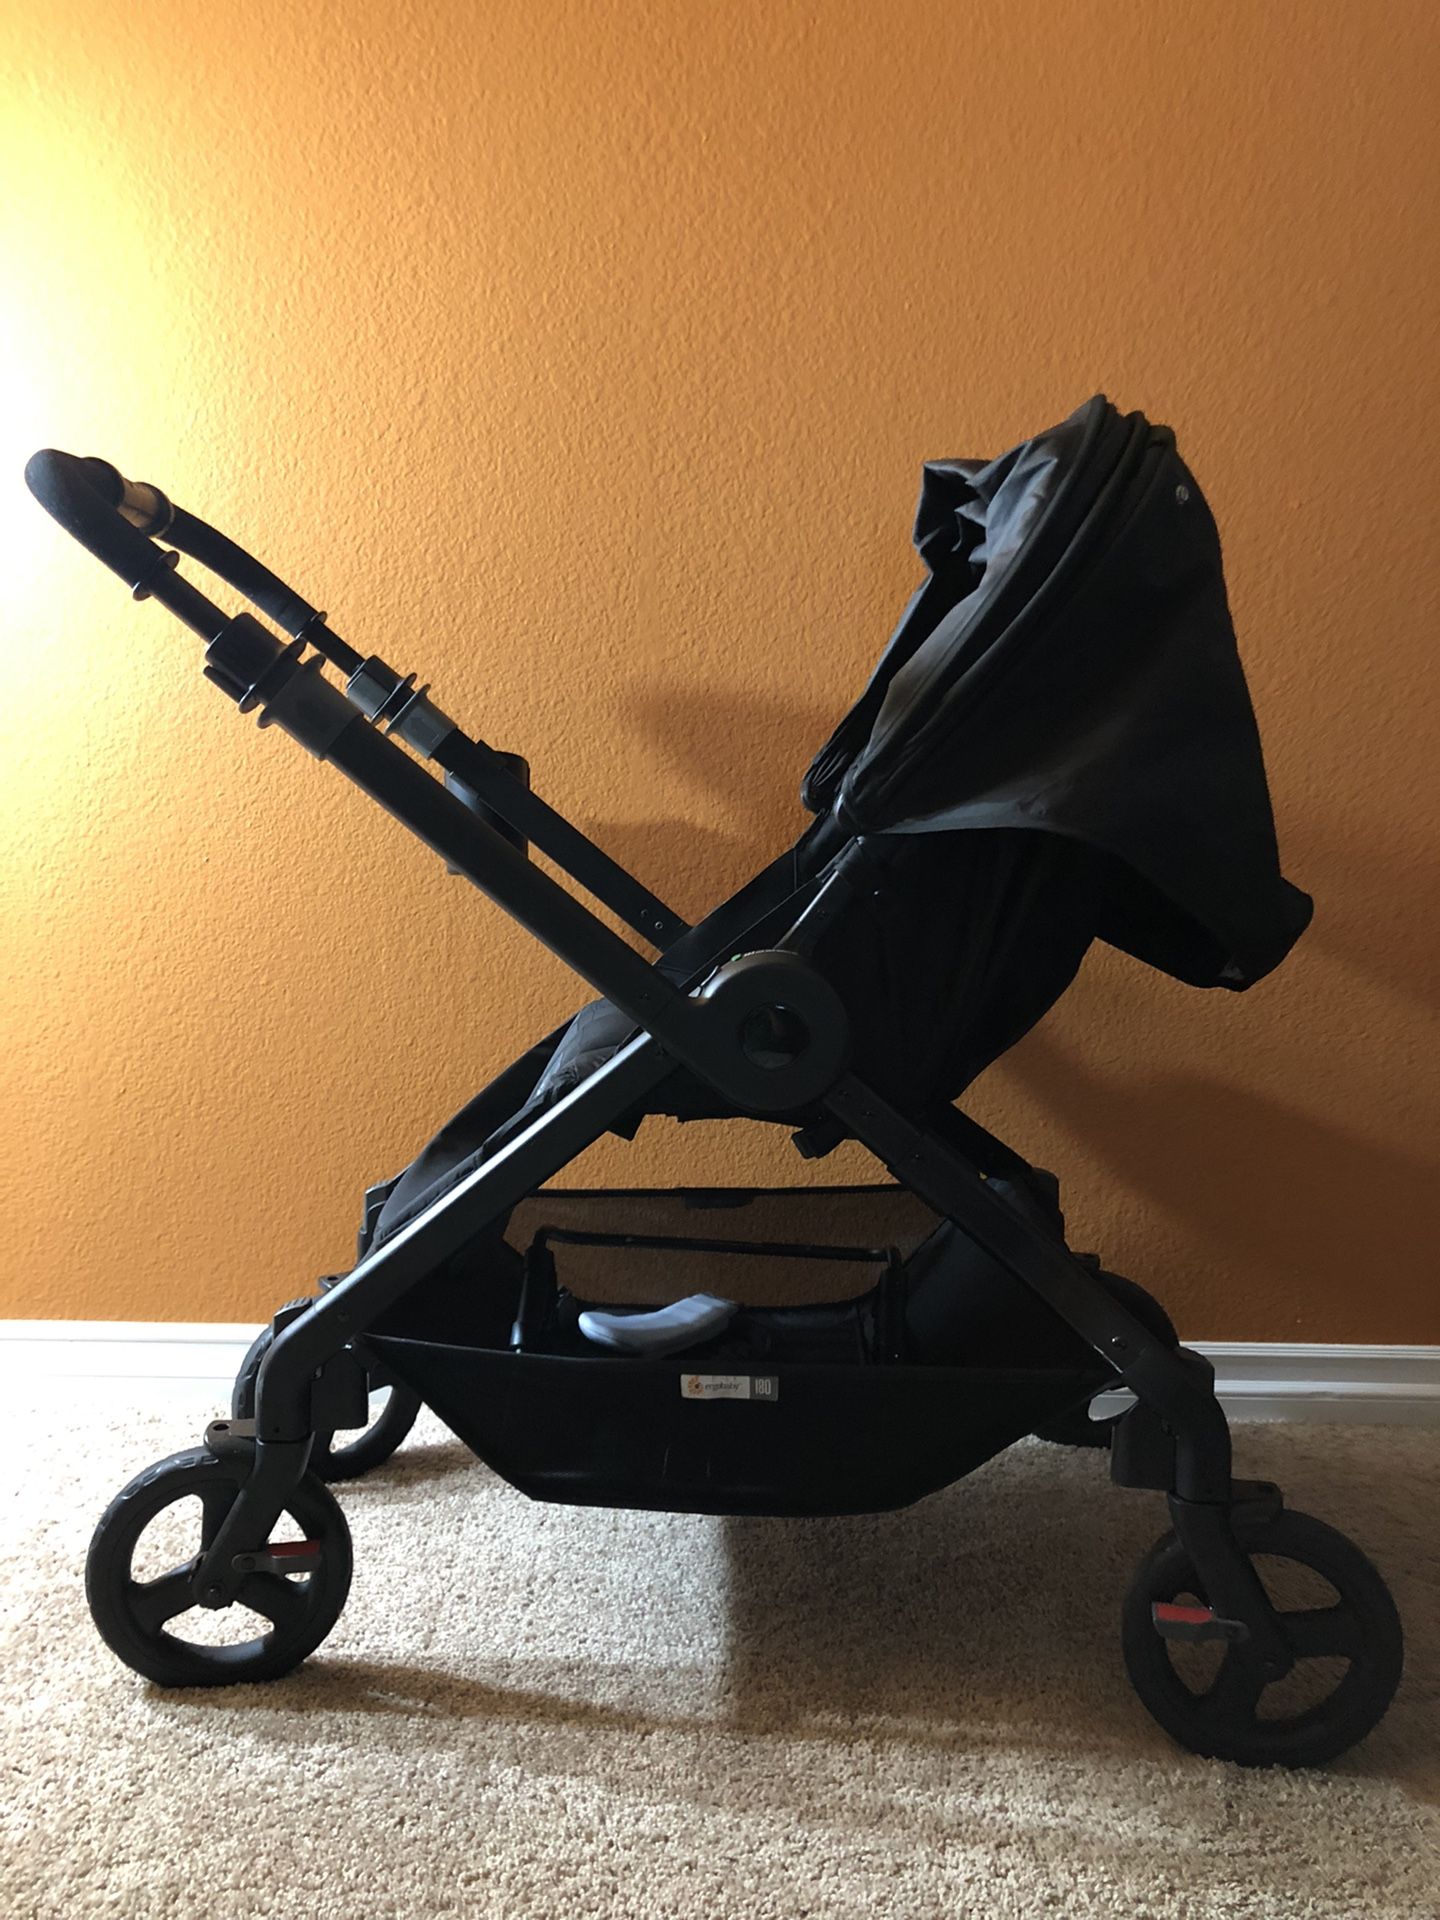 Ergobaby 180 Reversible stroller in Black: (Retail: $399 // $504 with included accessories)